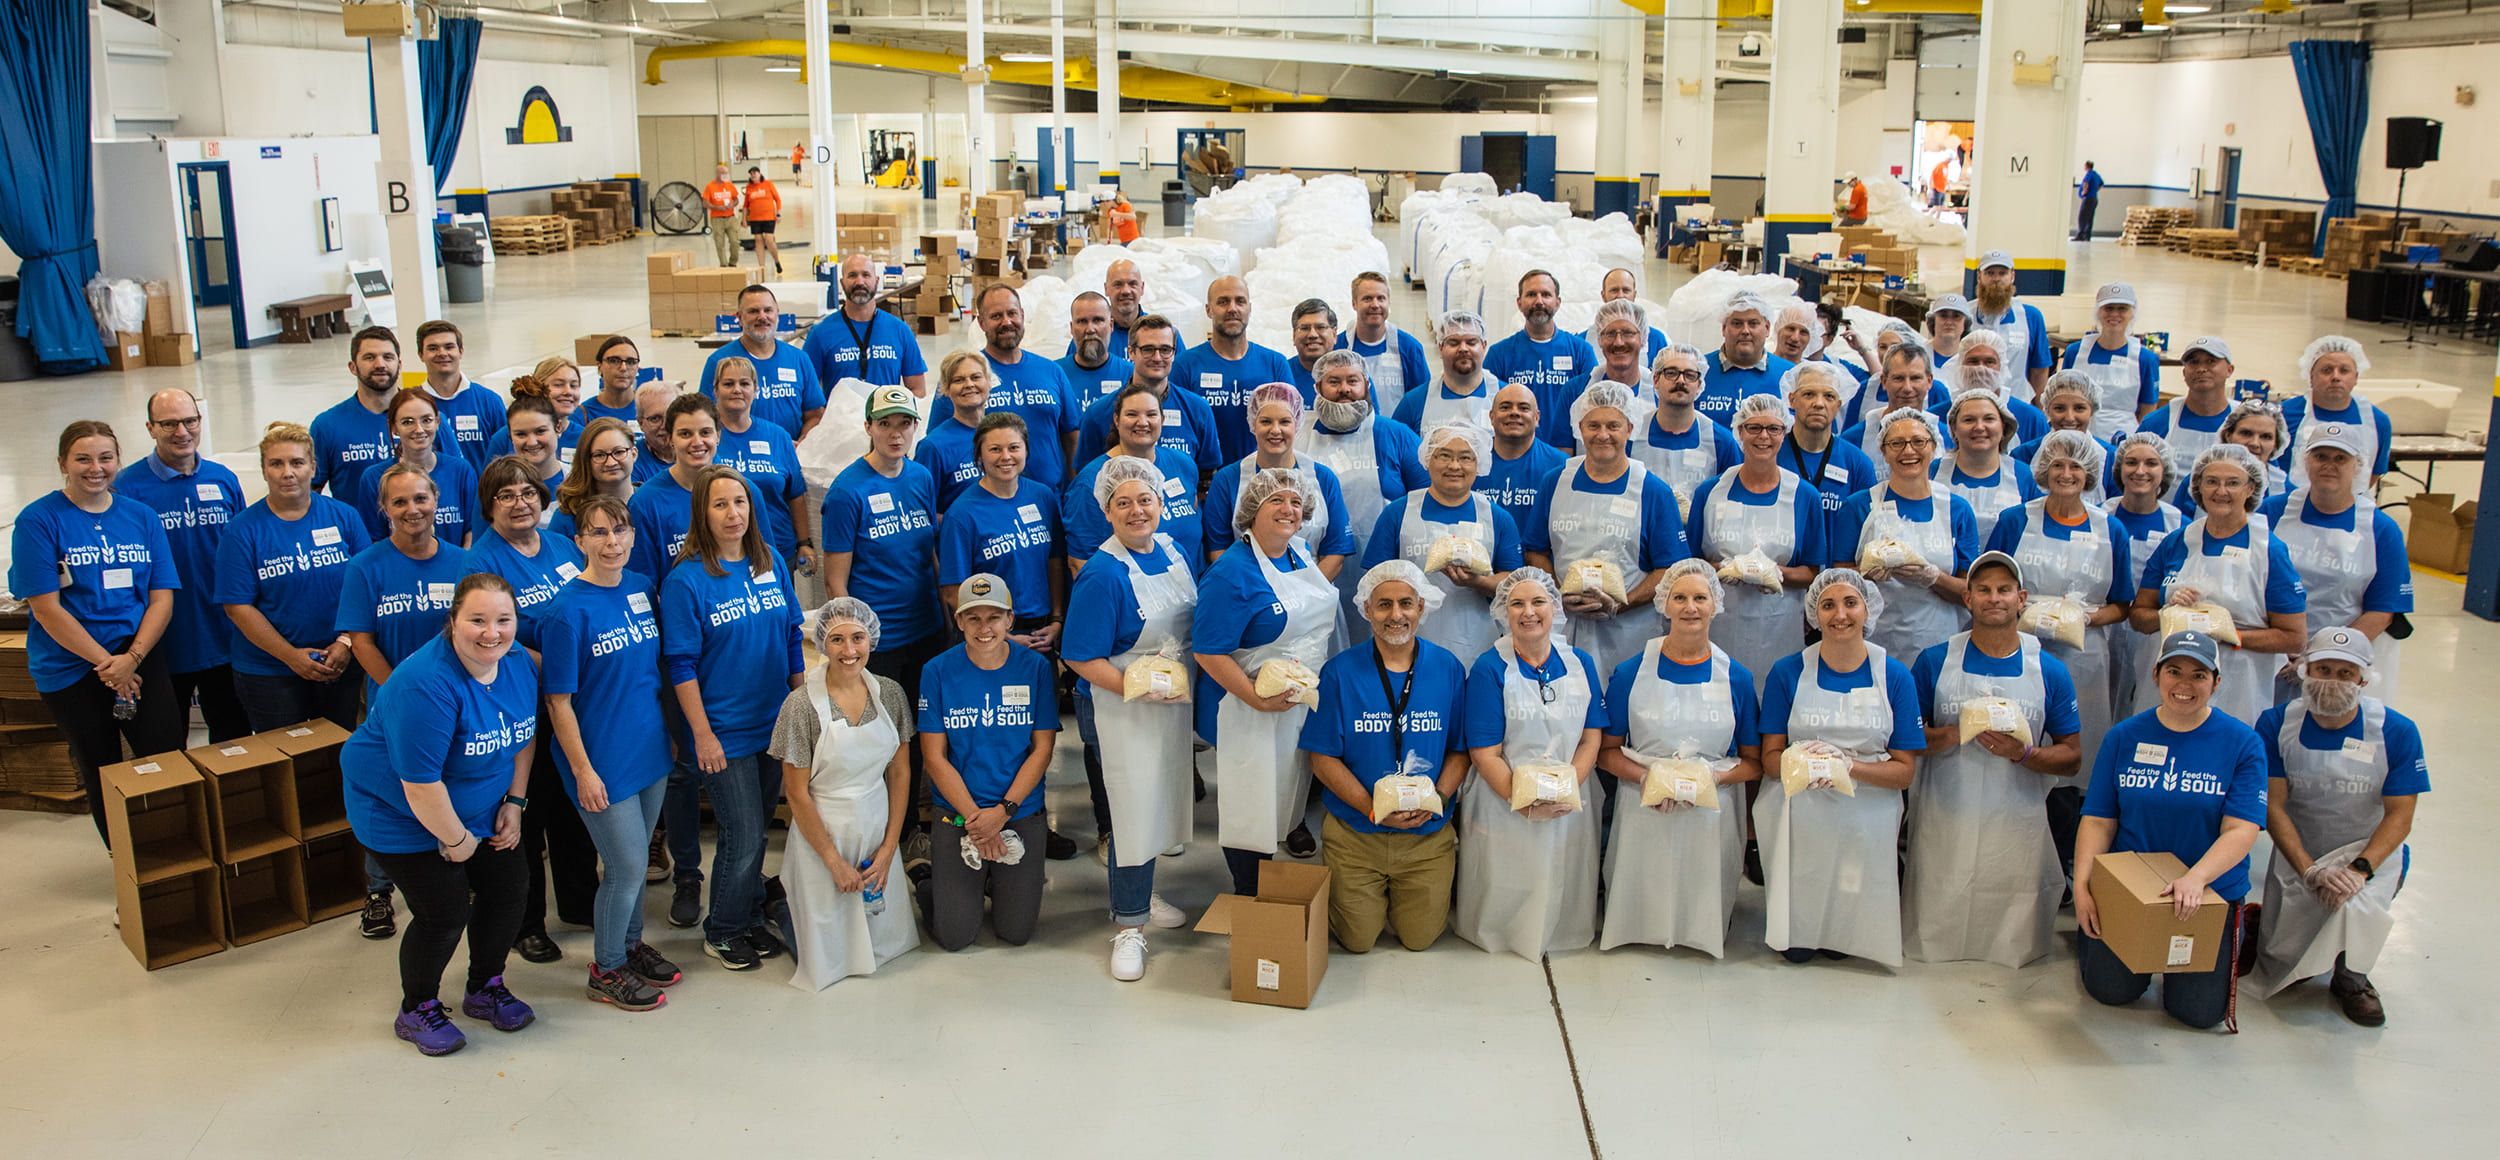 Large group of volunteers standing together at a rice packing event for a photo